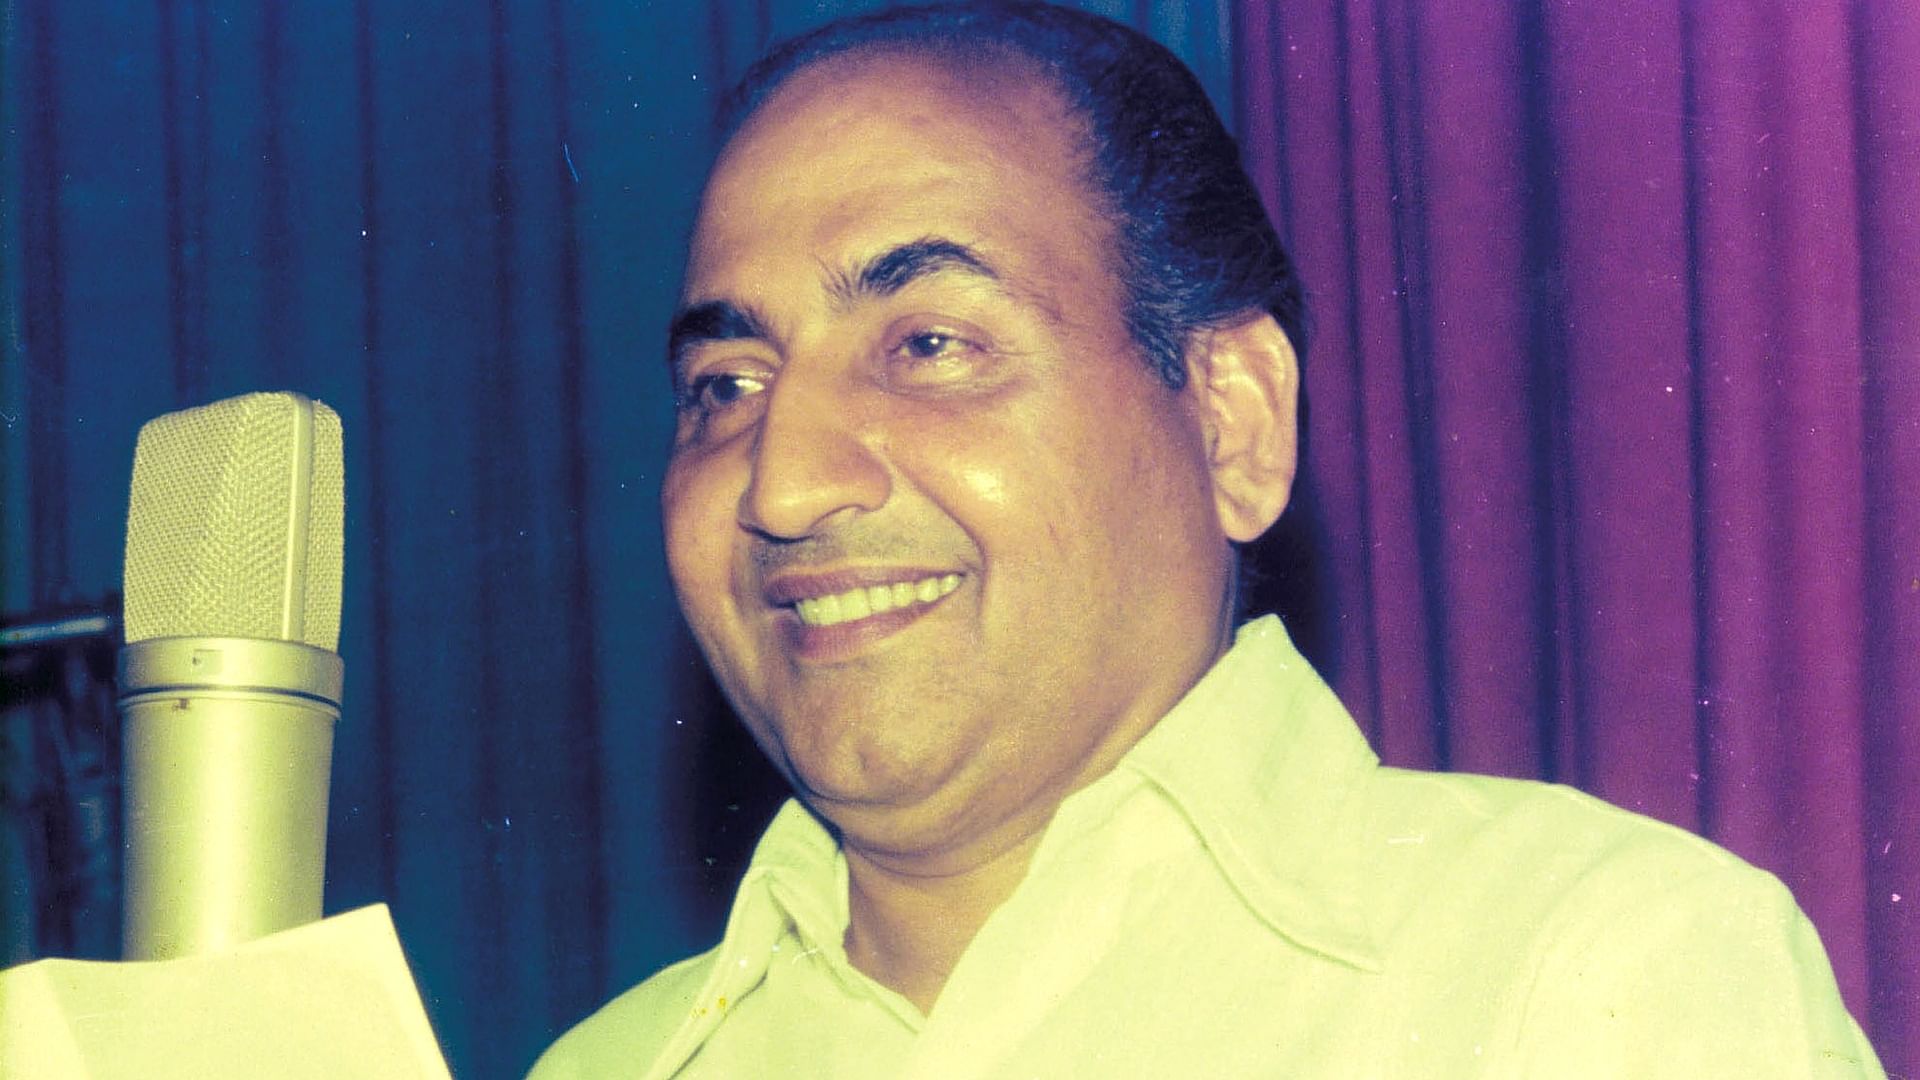 <p>Mohd Rafi was vintage and hip with equal charm.</p>